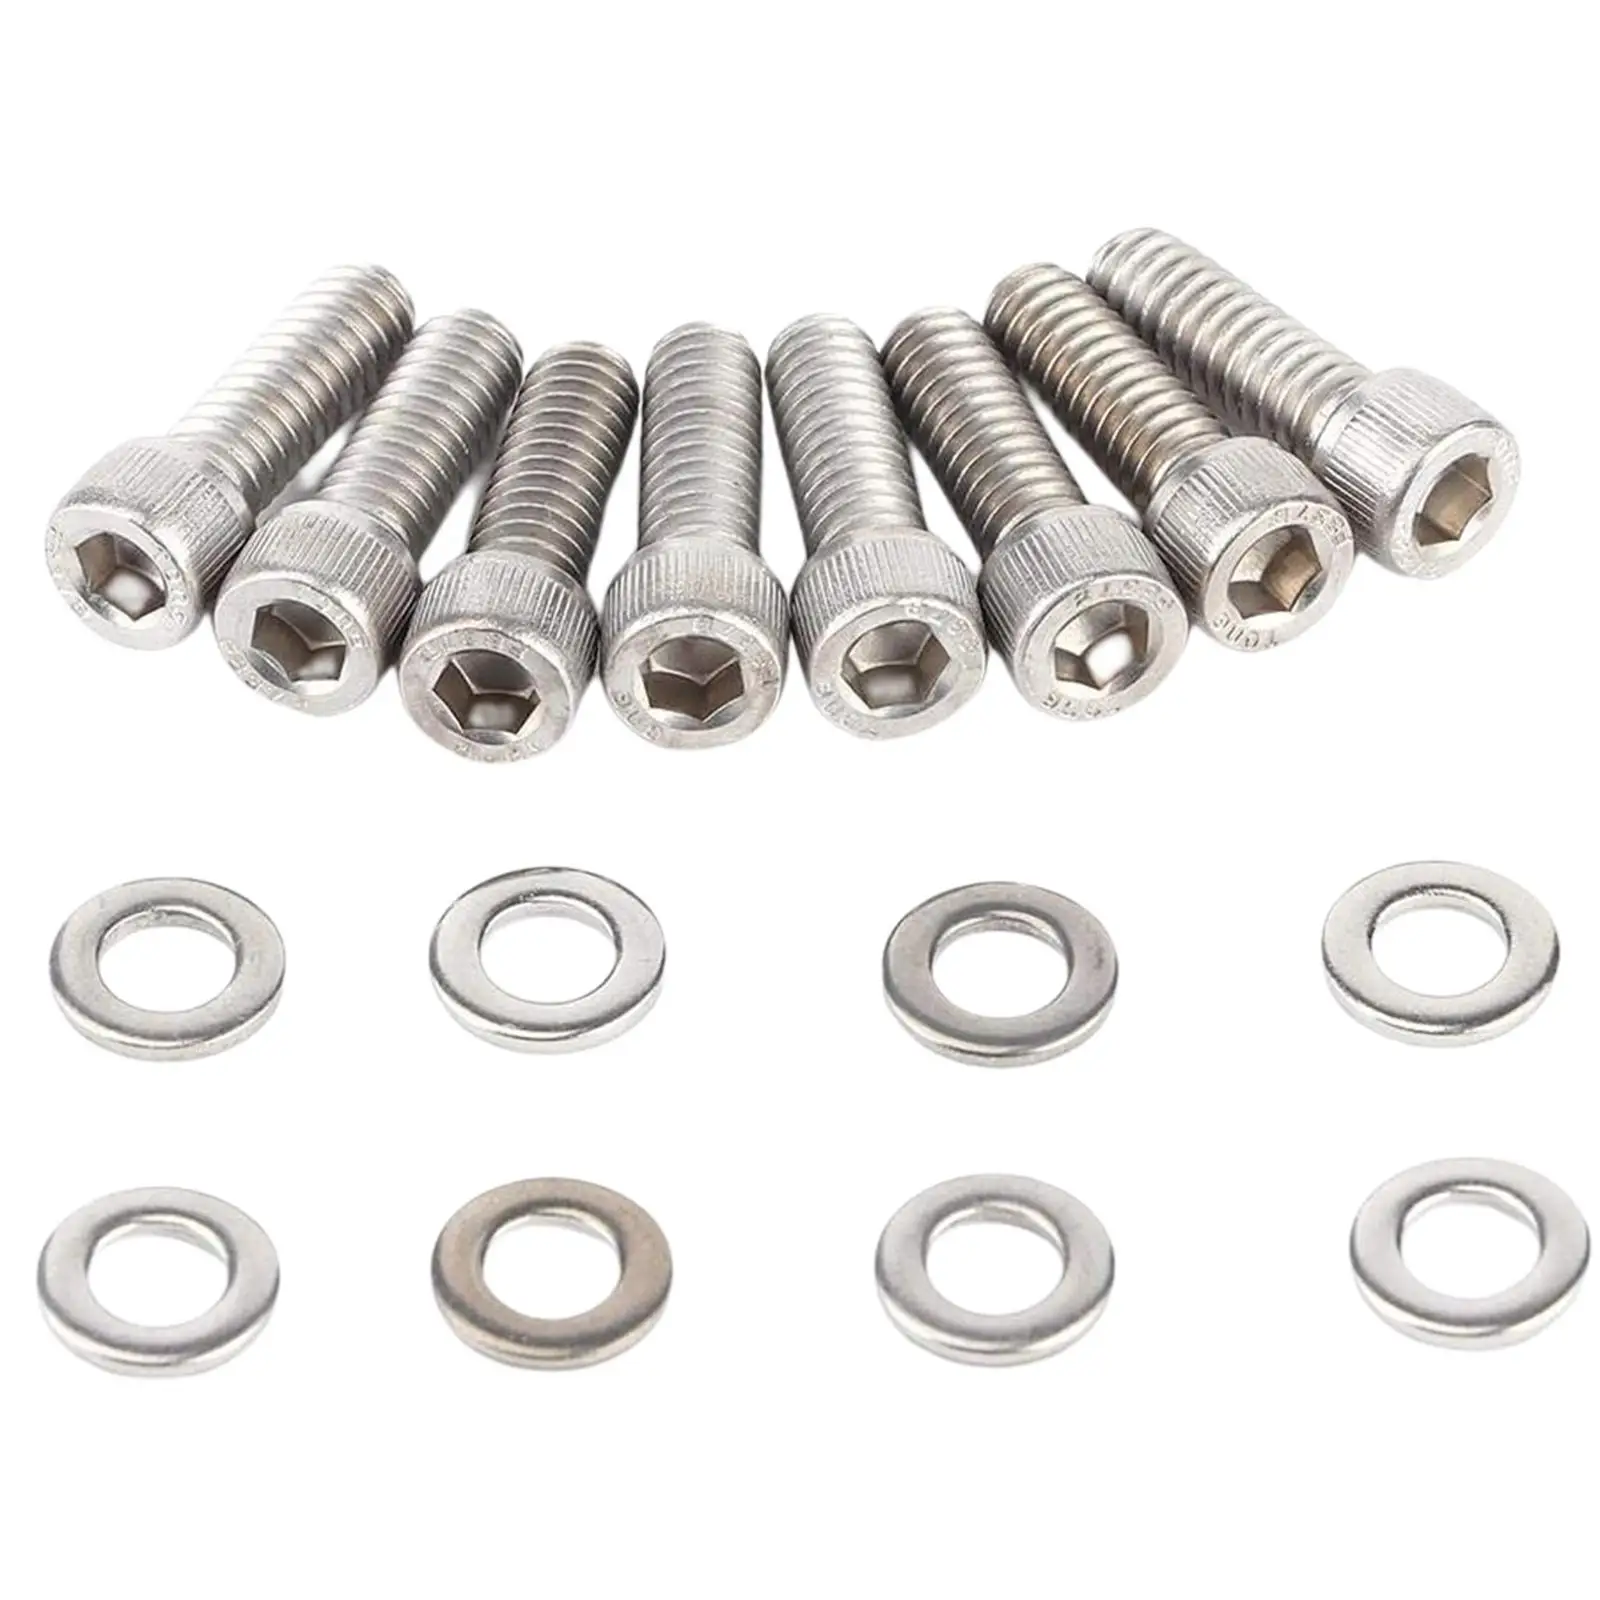 Sbc Valve Cover Bolts Replacement Cover Bolts Small Block Stainless Steel Kit Engine Fit for Chevrolet 283 327 350 383 400